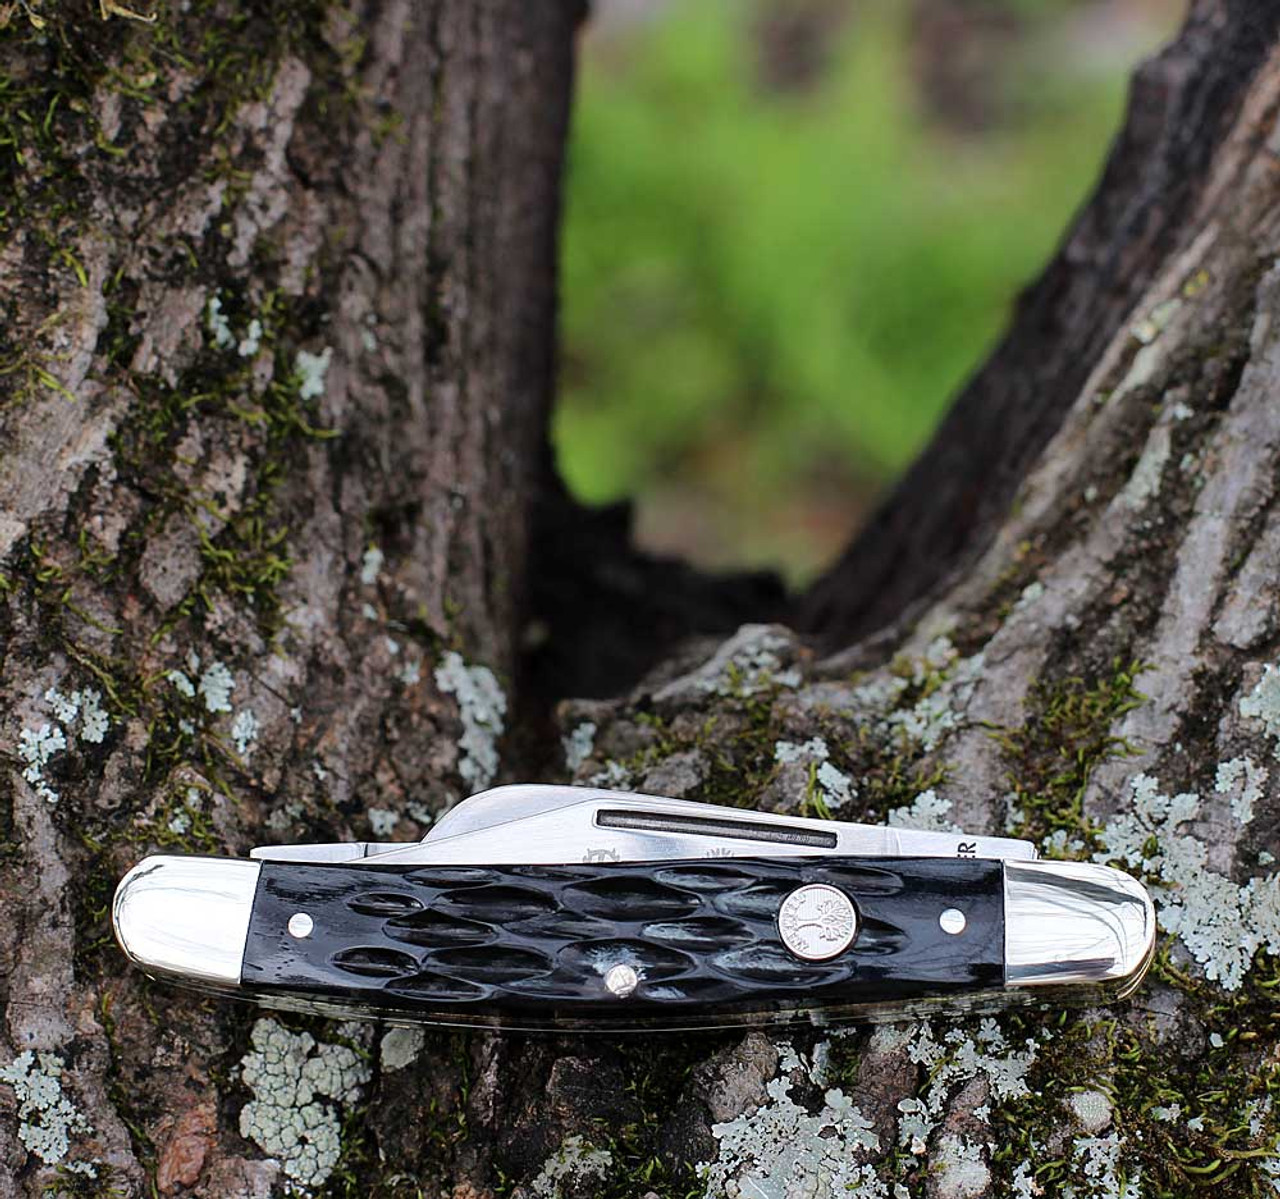 Boker Traditional Series Medium Stockman (BO110853) Mirror Polished D2 Clip, Sheepsfoot, and Pen Blades, Black Jigged Bone Handle with Nickel Silver Bolsters